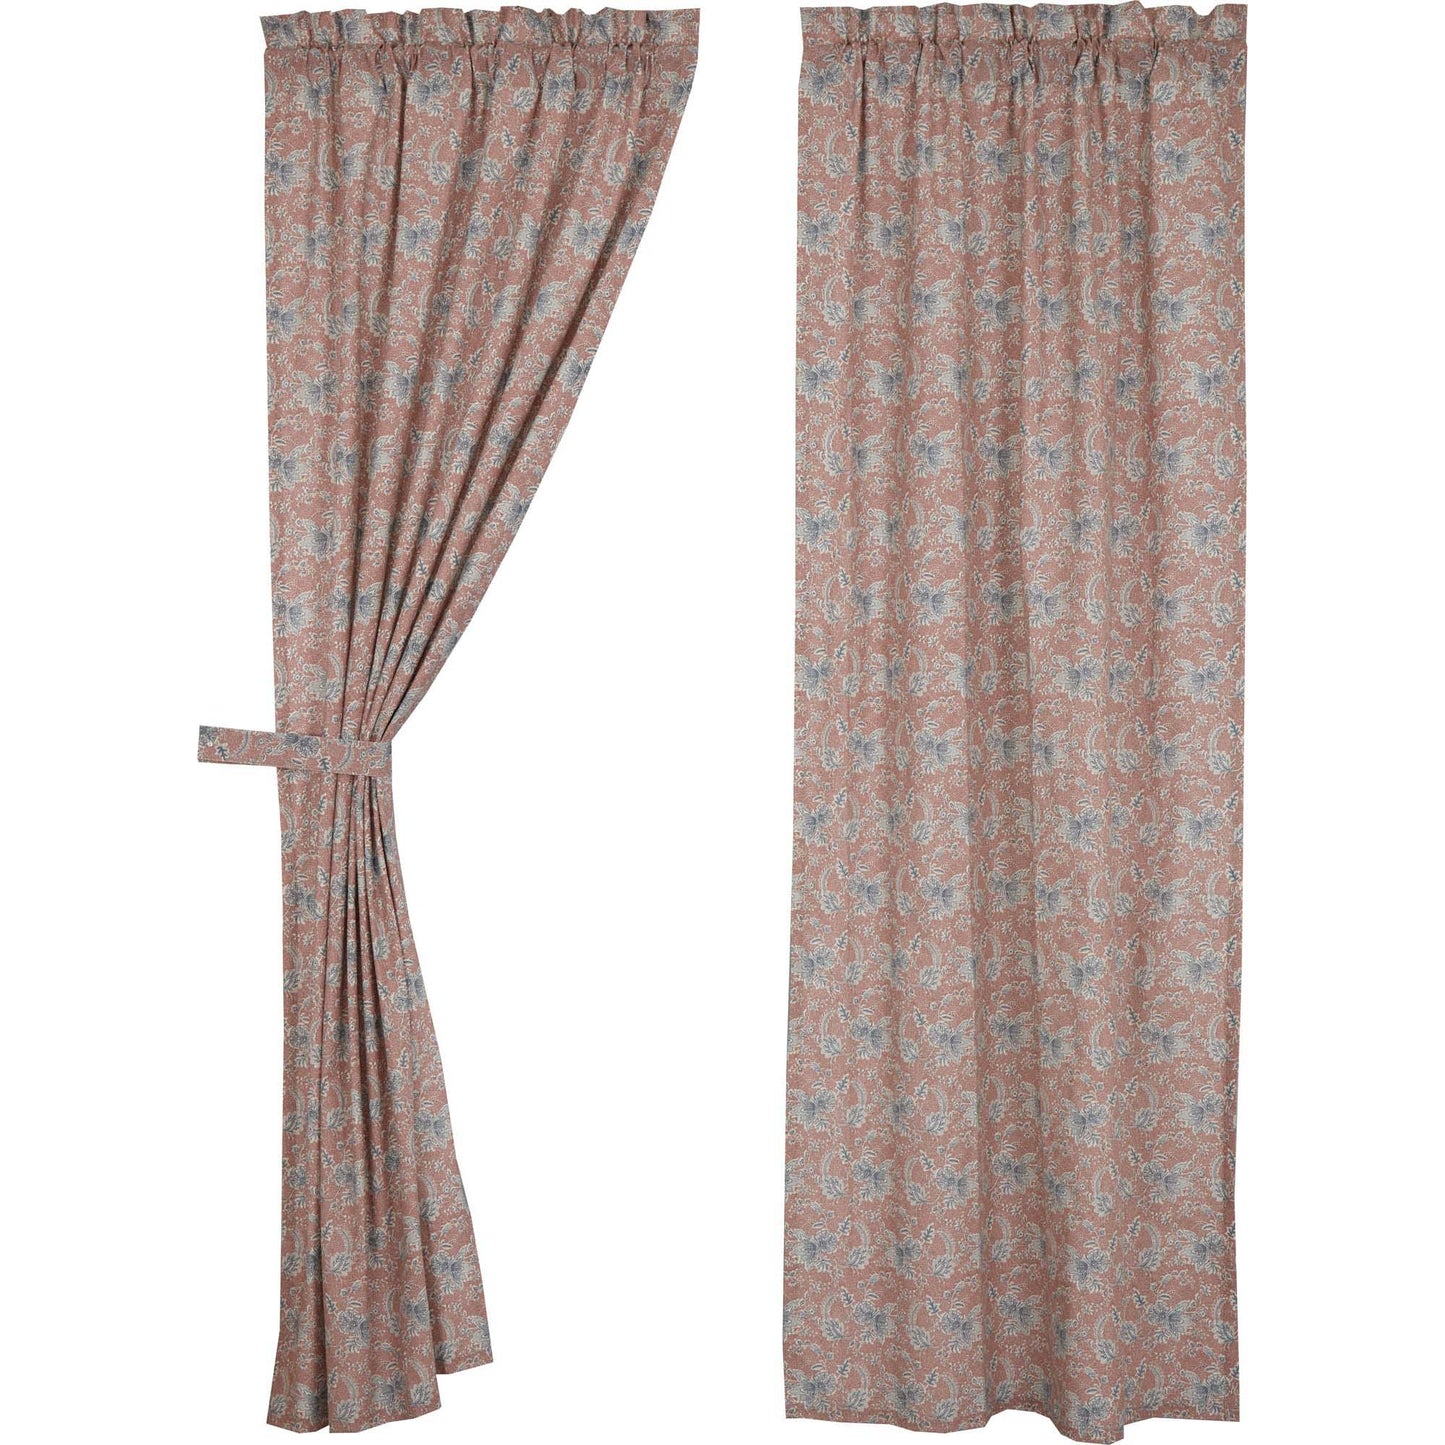 70155-Kaila-Floral-Panel-Set-of-2-84x40-image-2